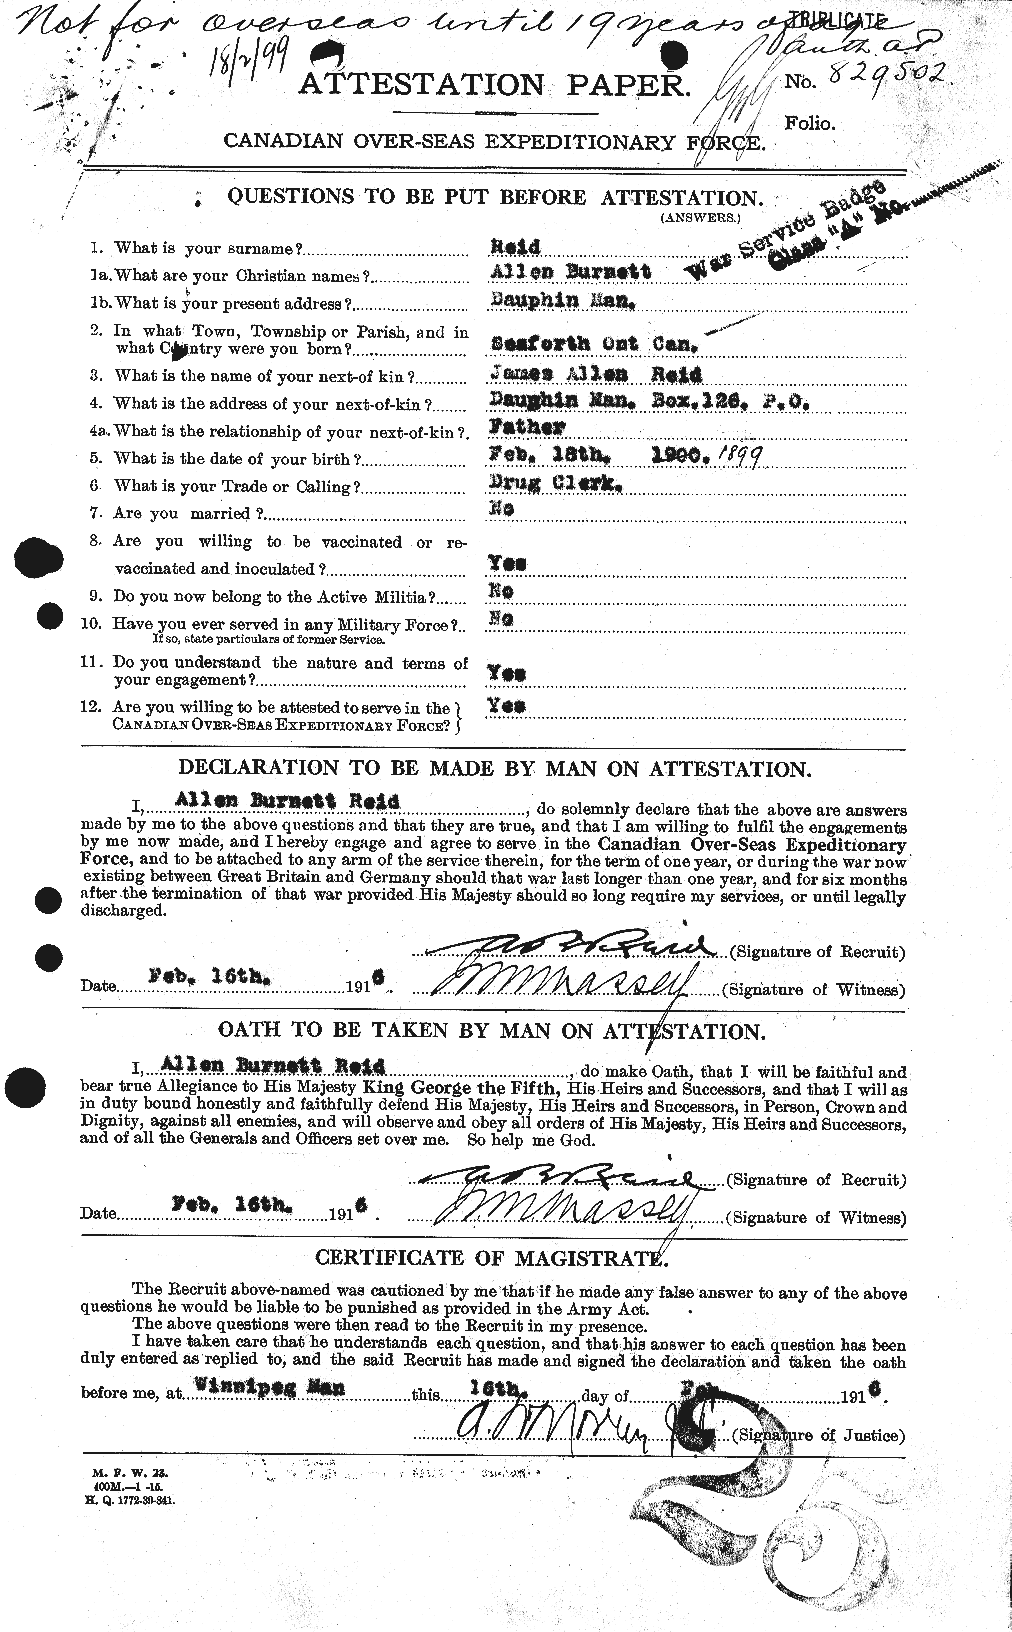 Personnel Records of the First World War - CEF 597803a